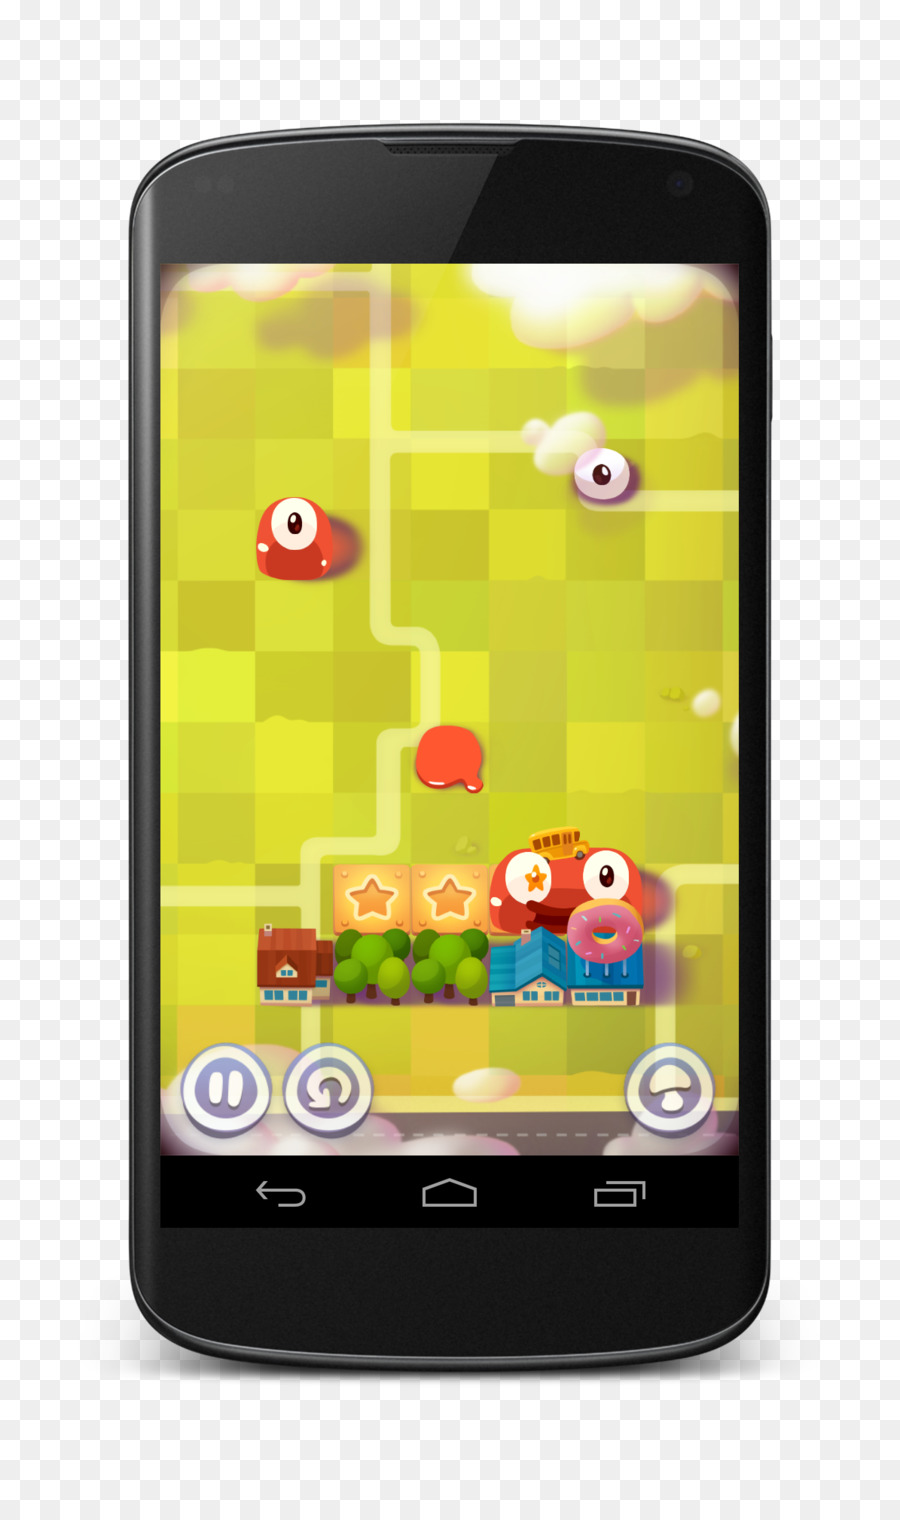 Feature phone Smartphone Pudding Monsters Arcade Spiel - Smartphone